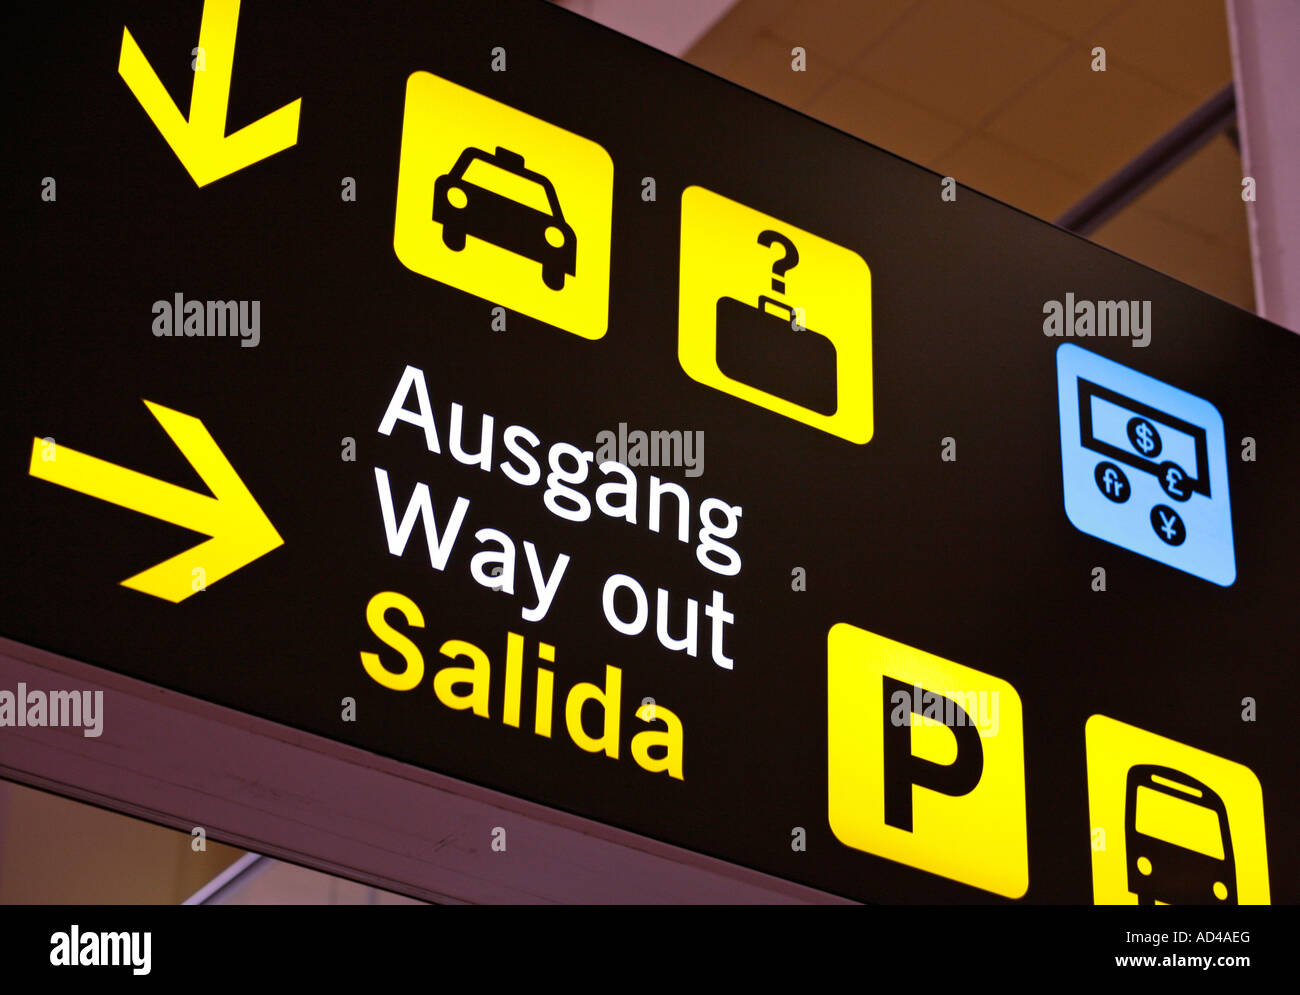 Multilingual airport sign, directions to way out, Malaga, Spain Stock Photo